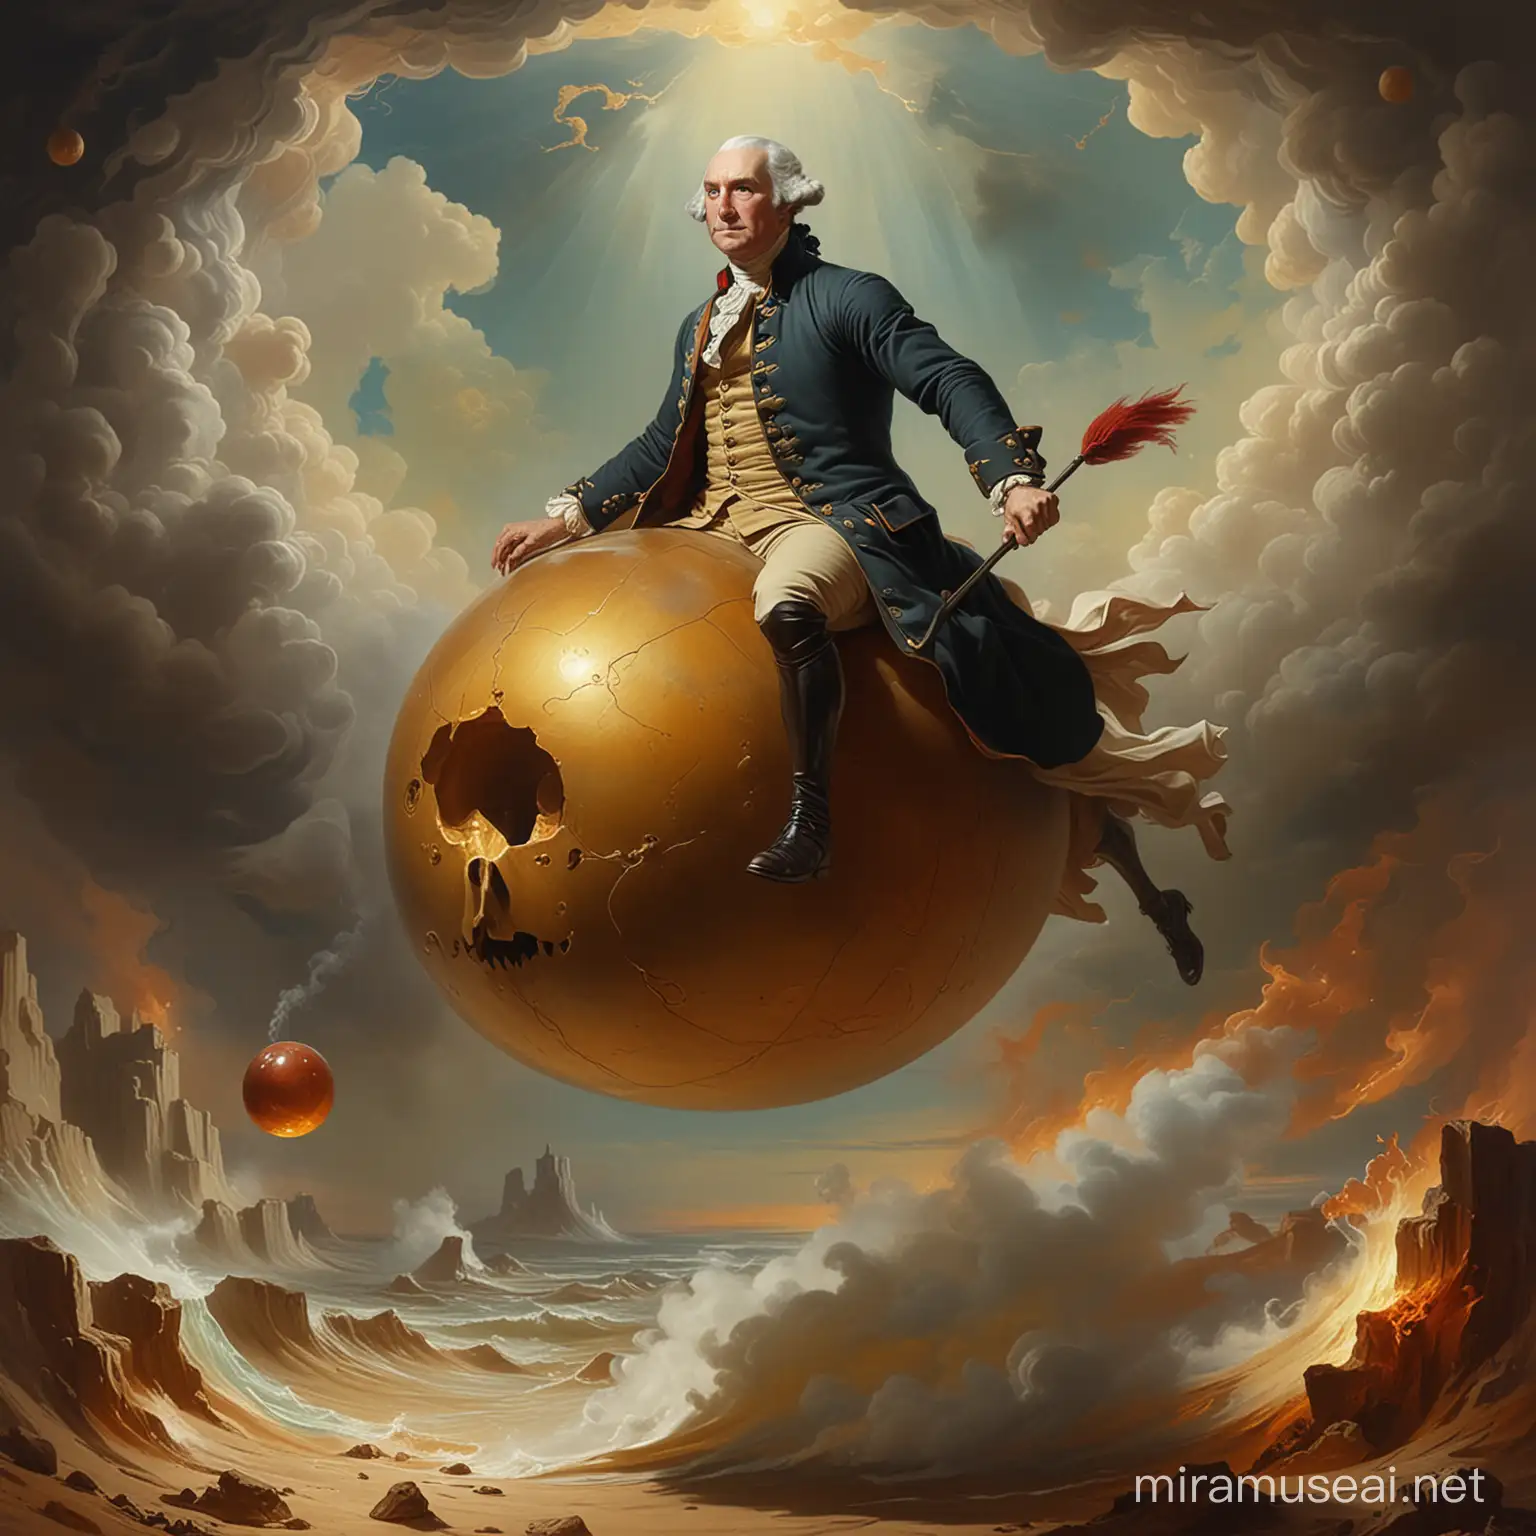 George washington riding a bouncing ball to hell in the style of dali